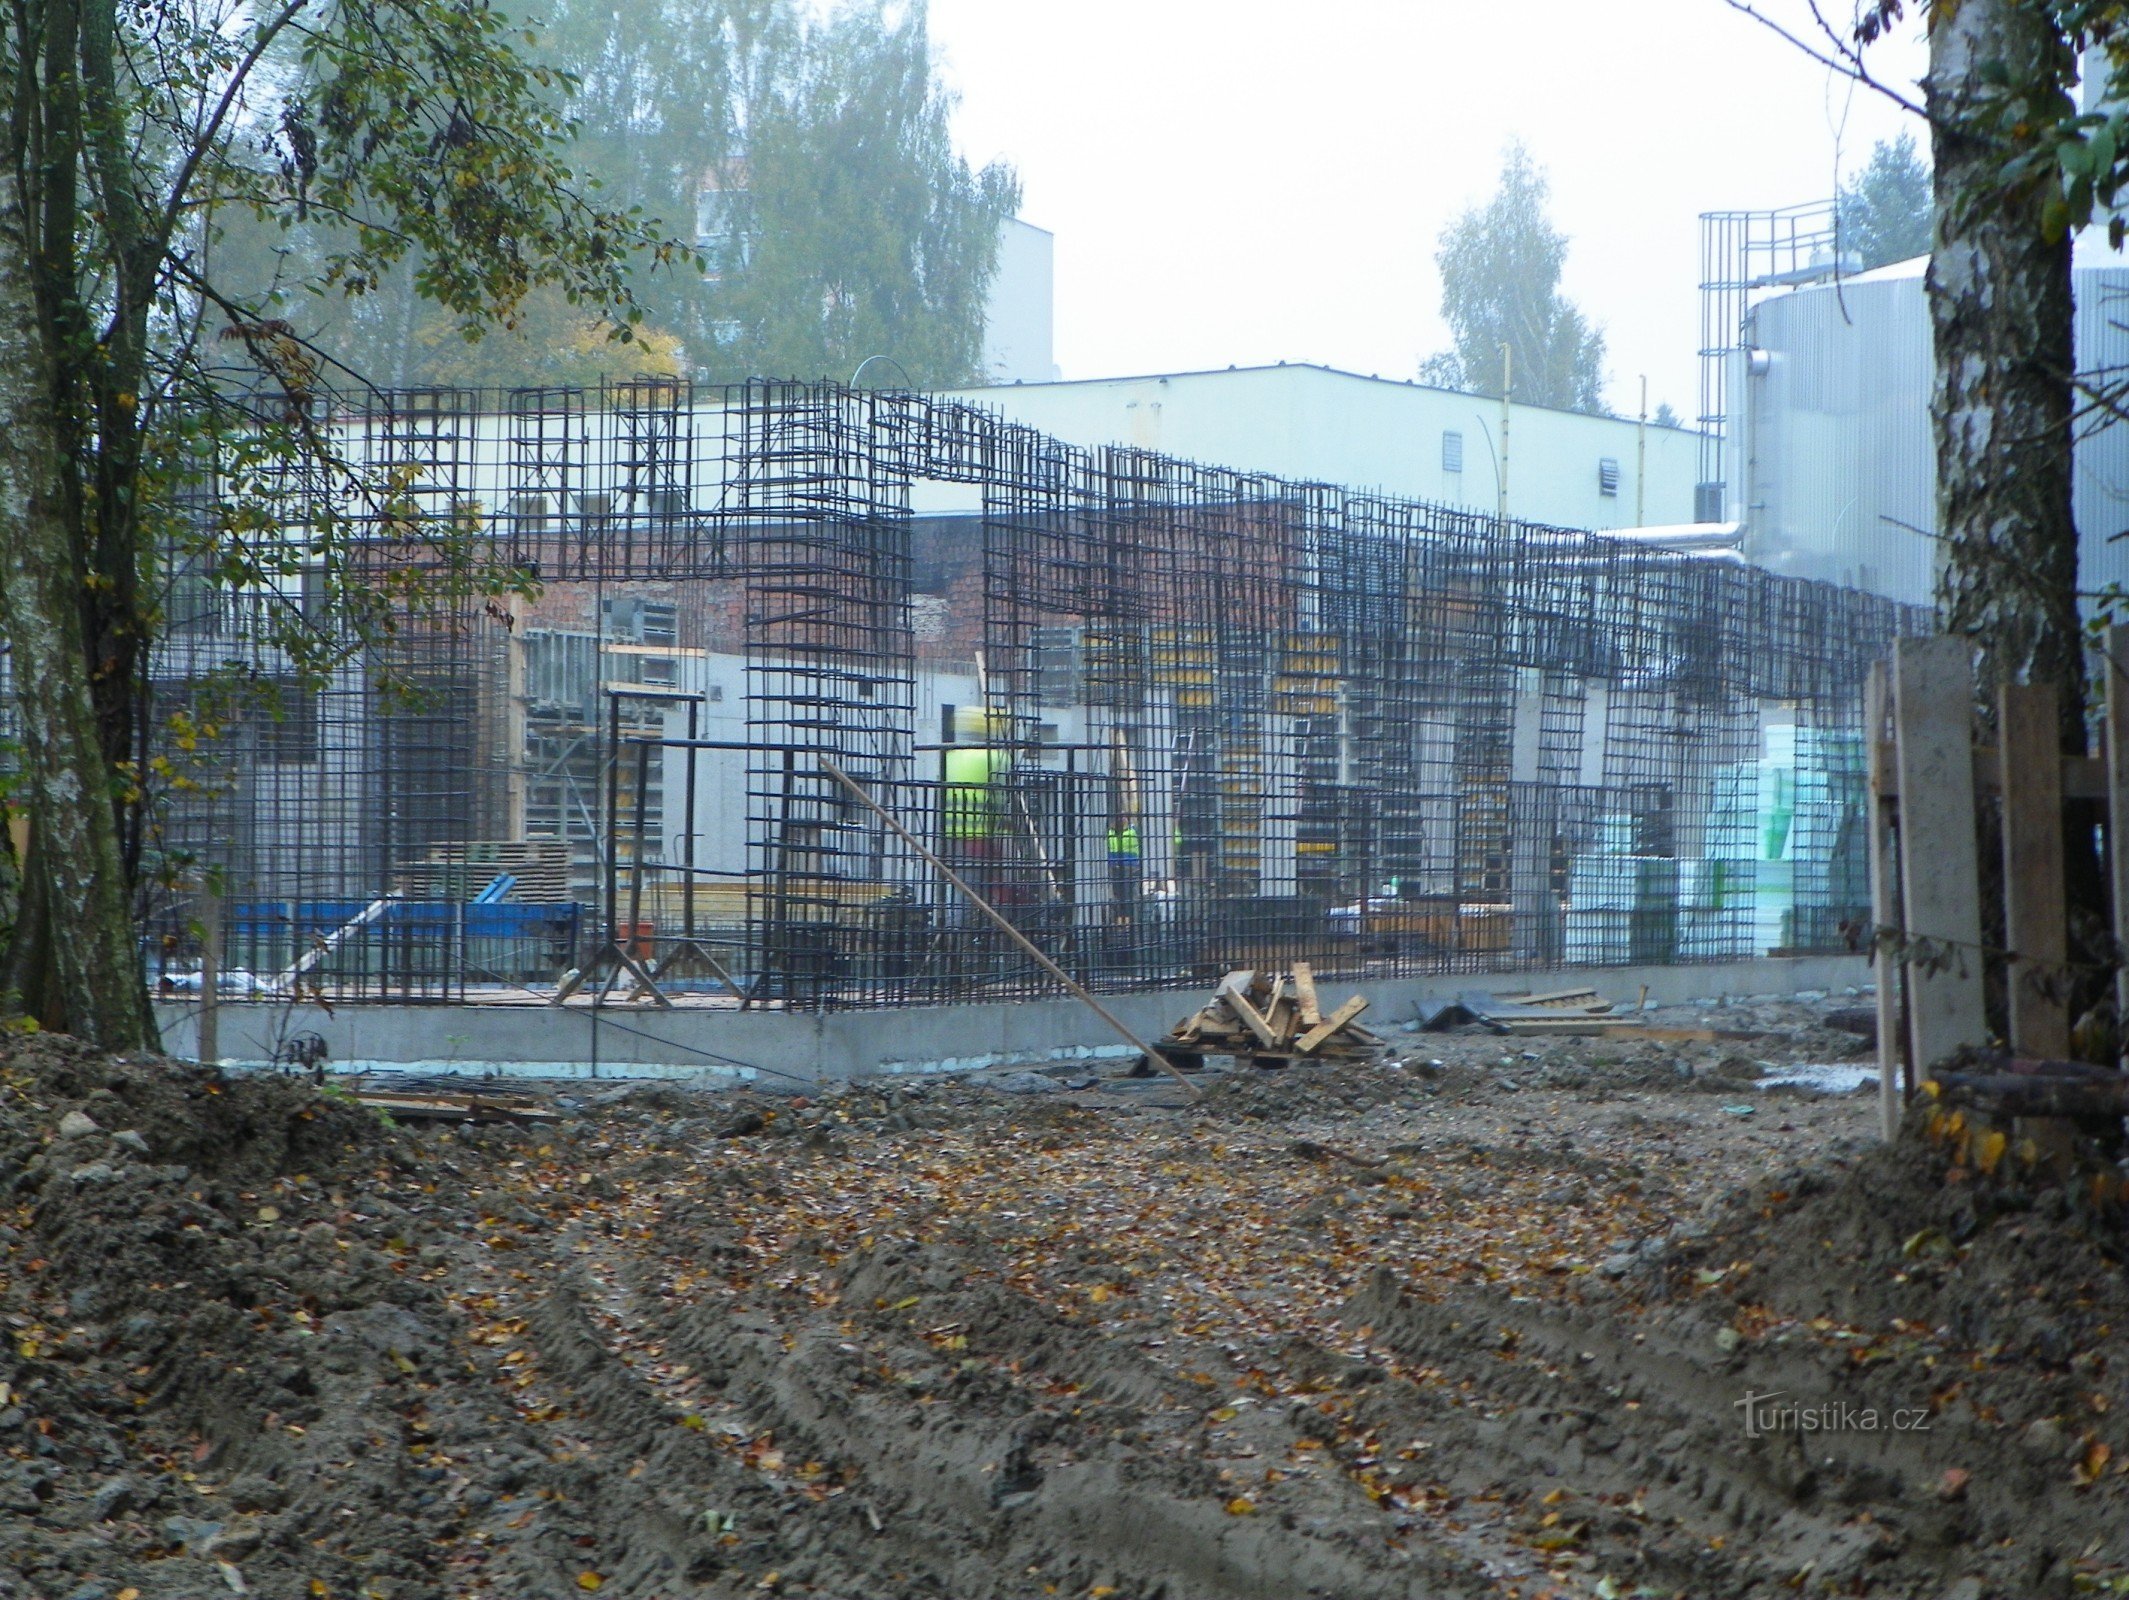 Ongoing spa construction October 2014